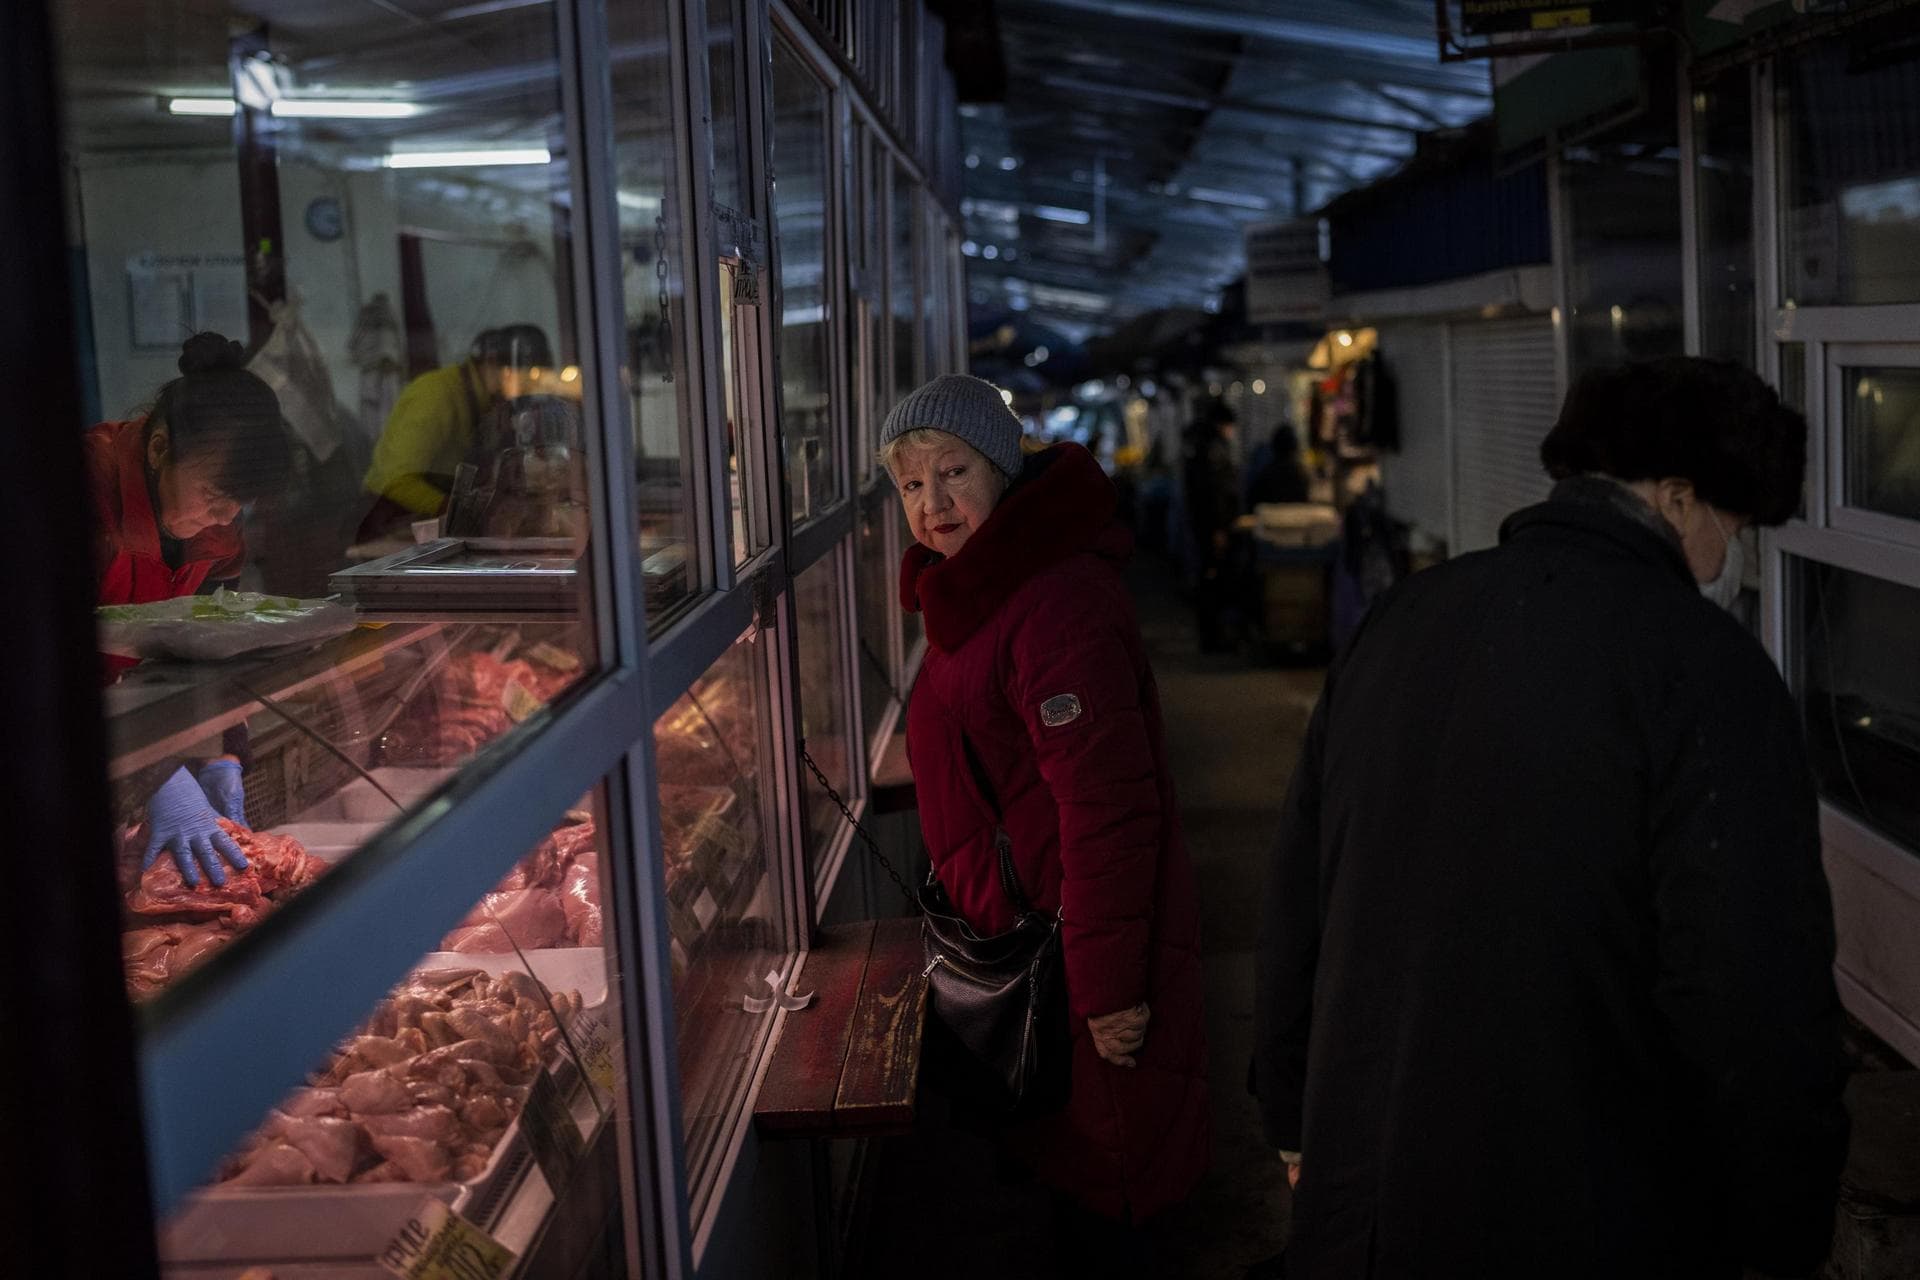 A woman buys meat inside a local market in Kyiv